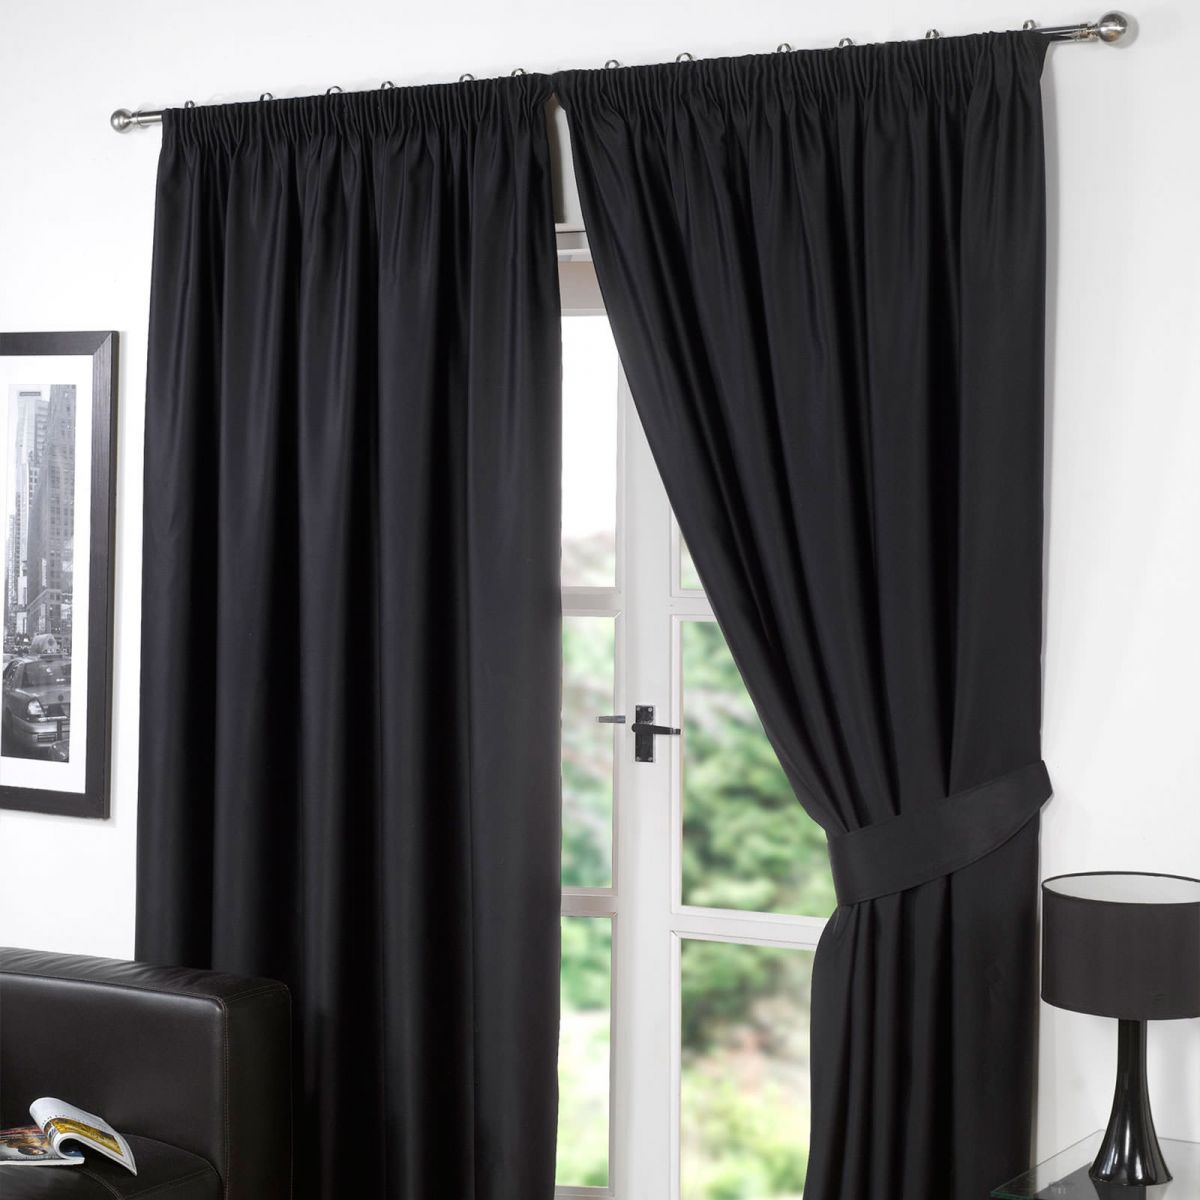 Pencil Pleat Thermal Blackout Fully Lined Curtains - Black 66x54